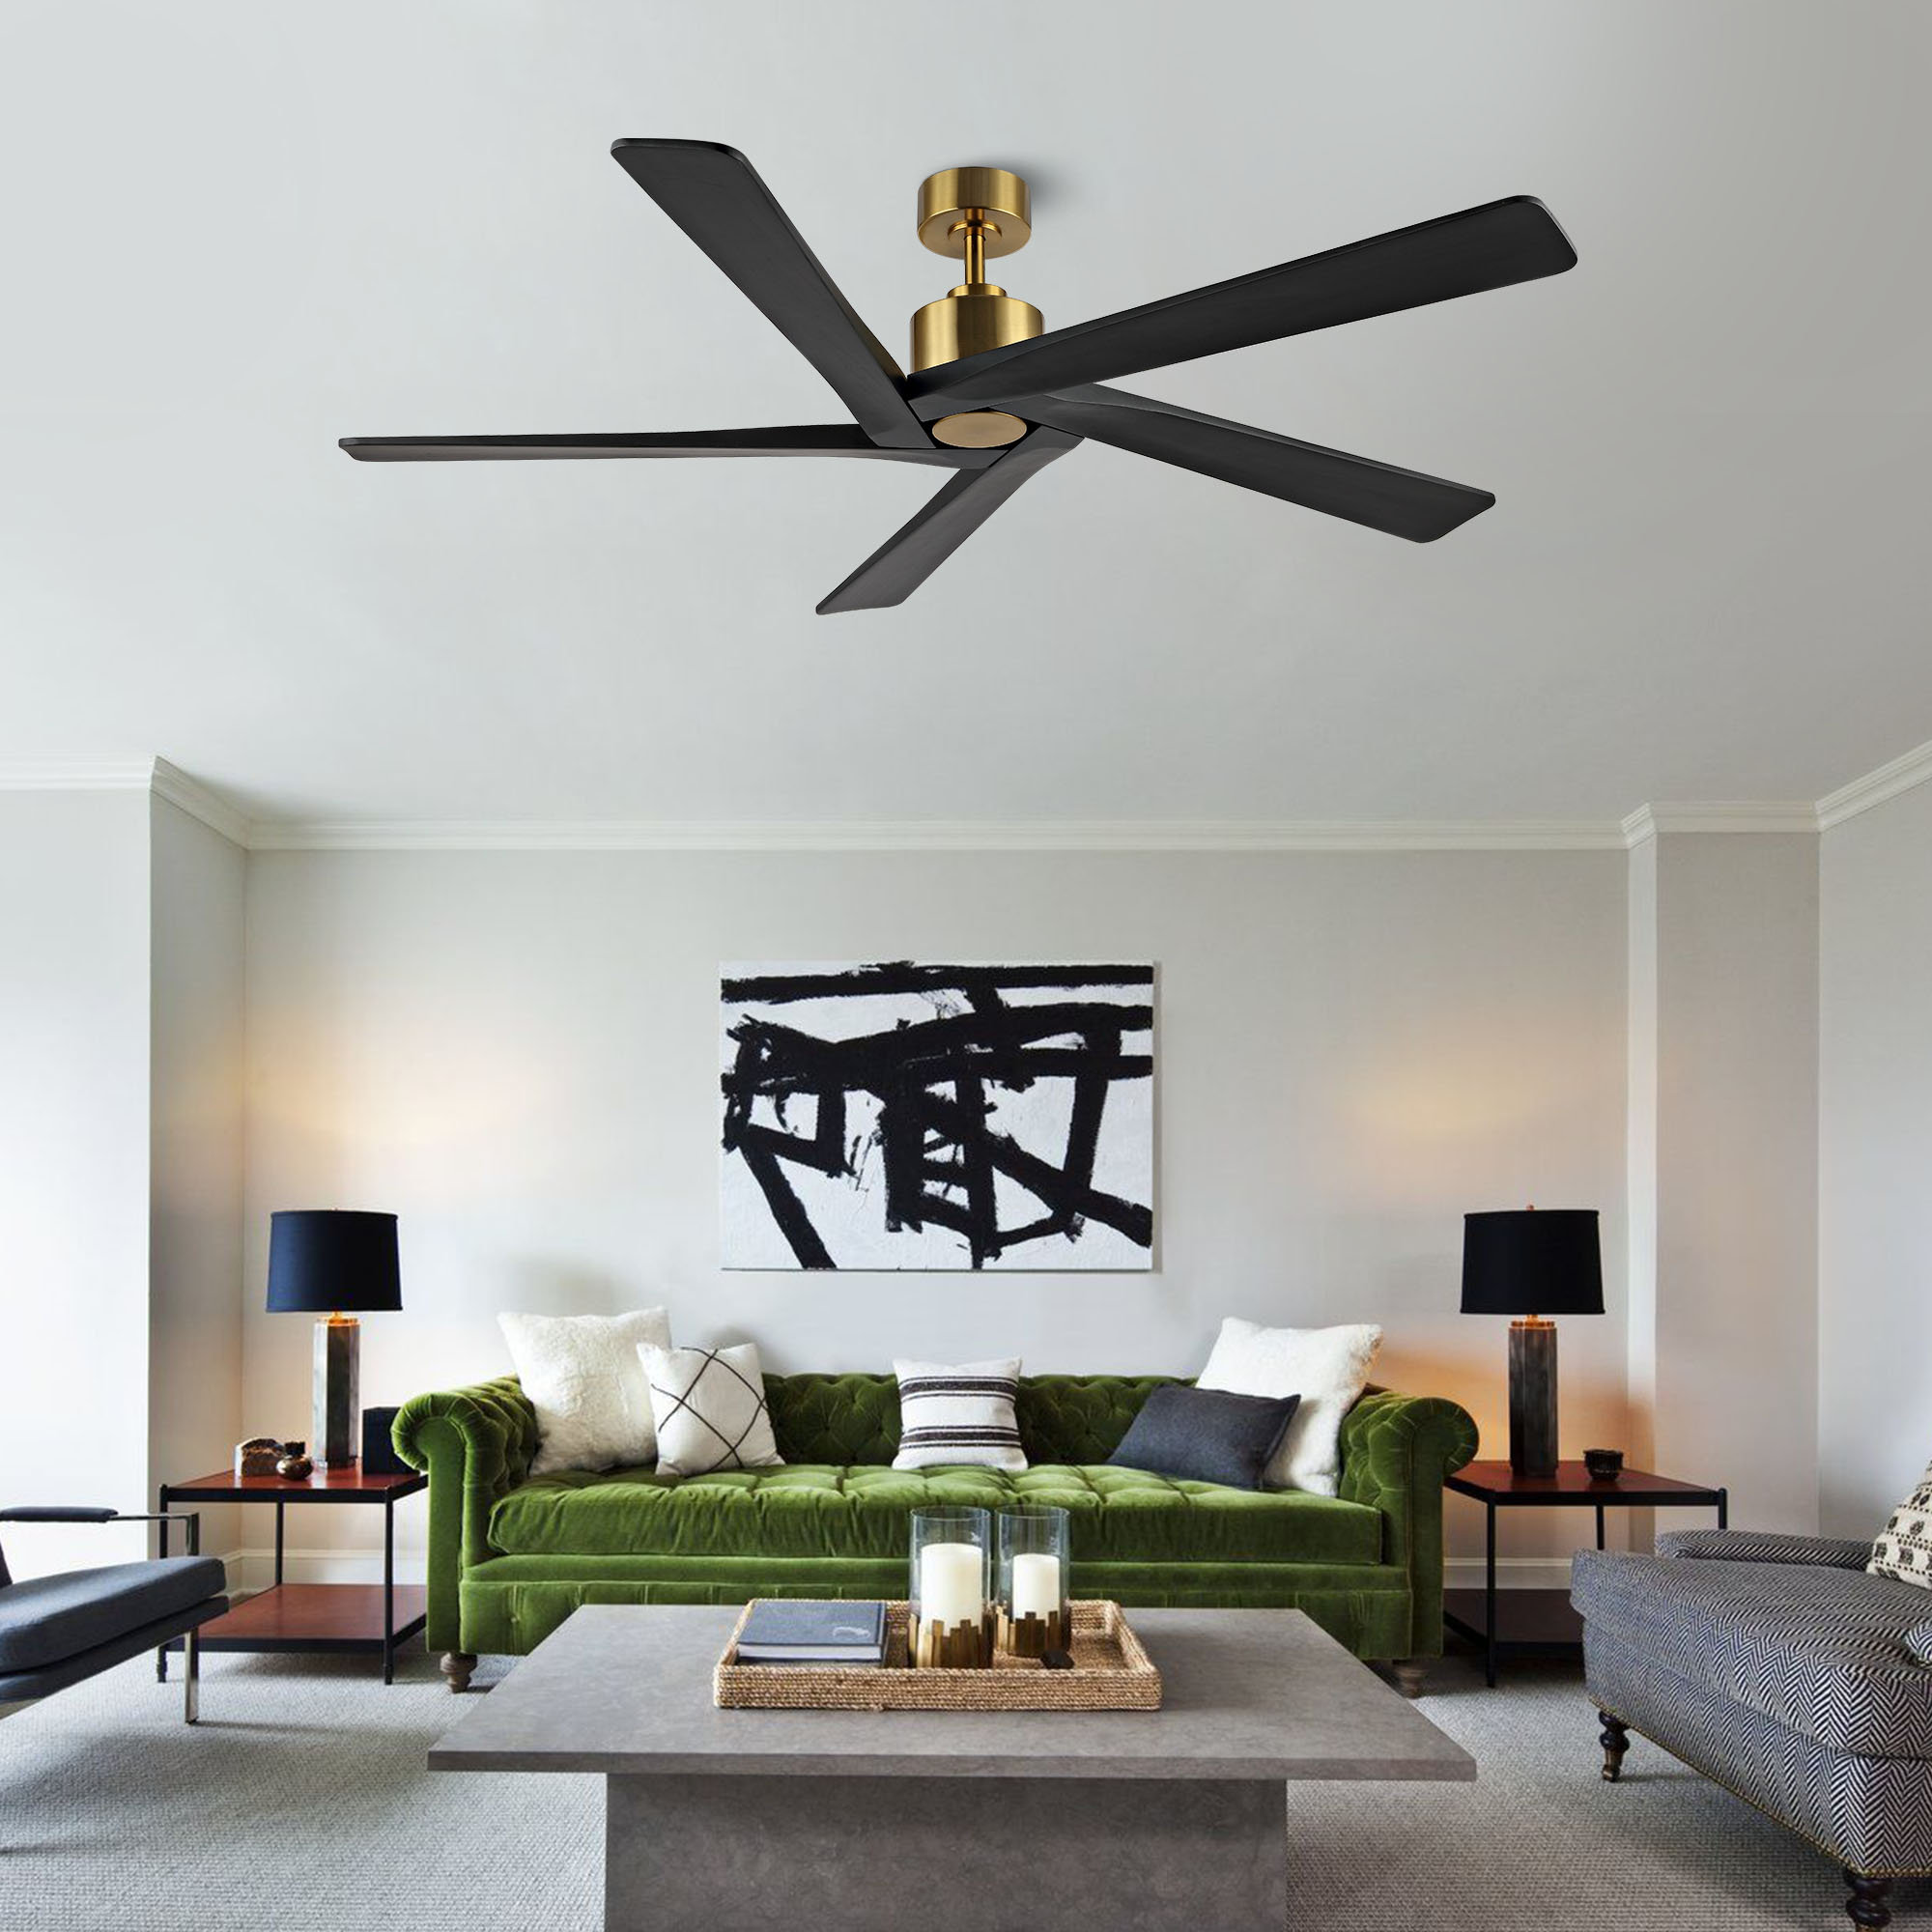 How Many Blades For Ceiling Fan